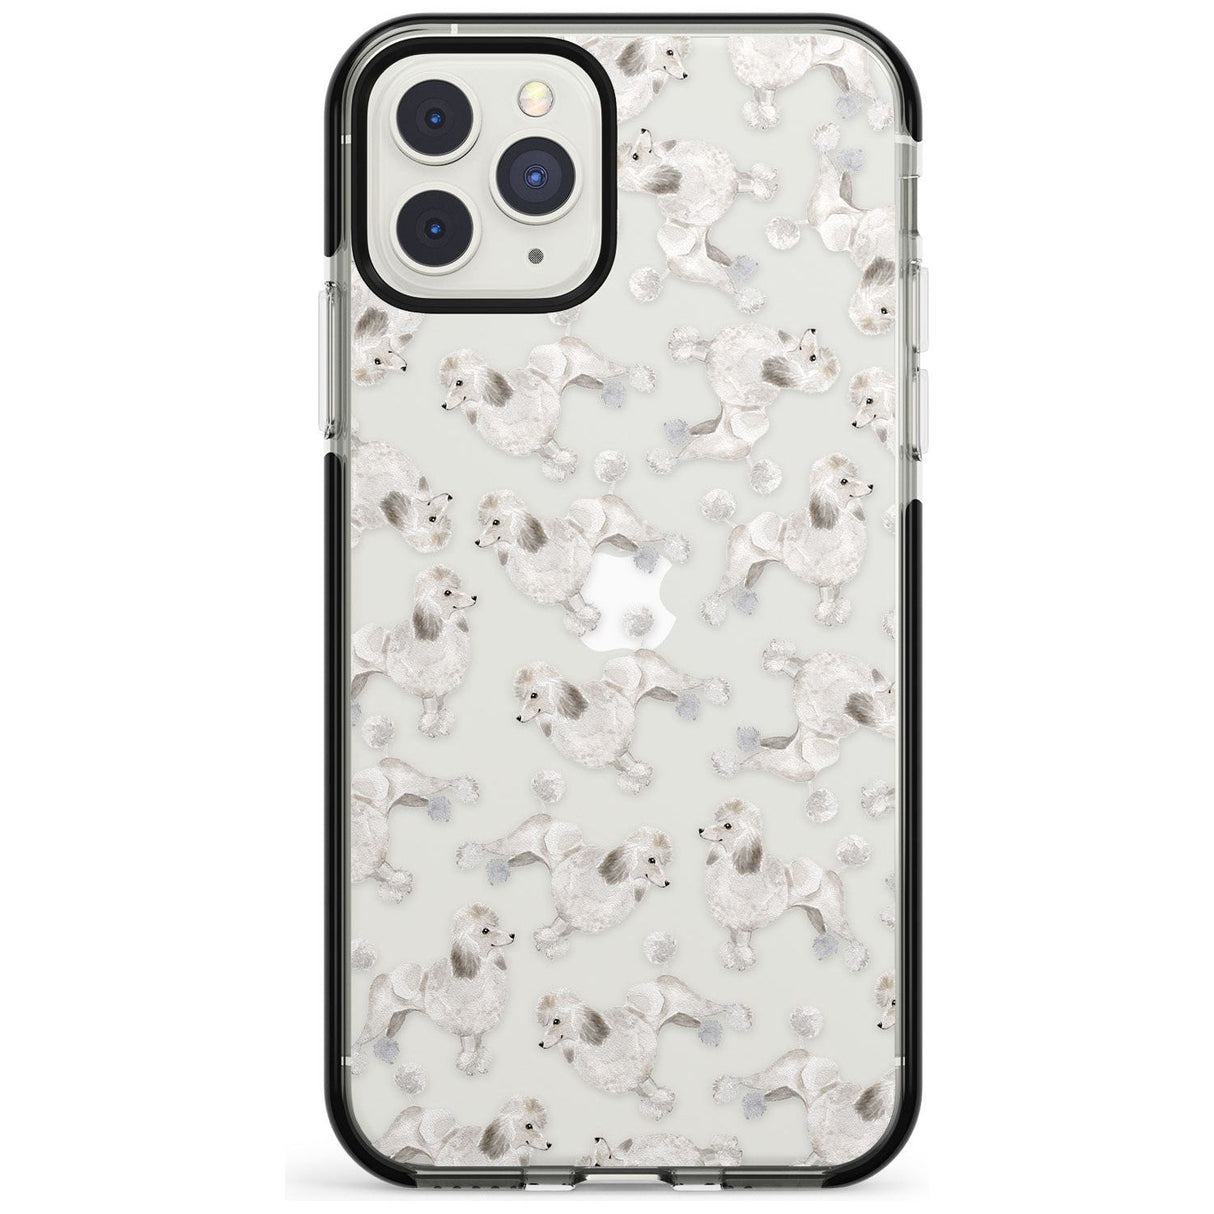 Poodle (White) Watercolour Dog Pattern Black Impact Phone Case for iPhone 11 Pro Max